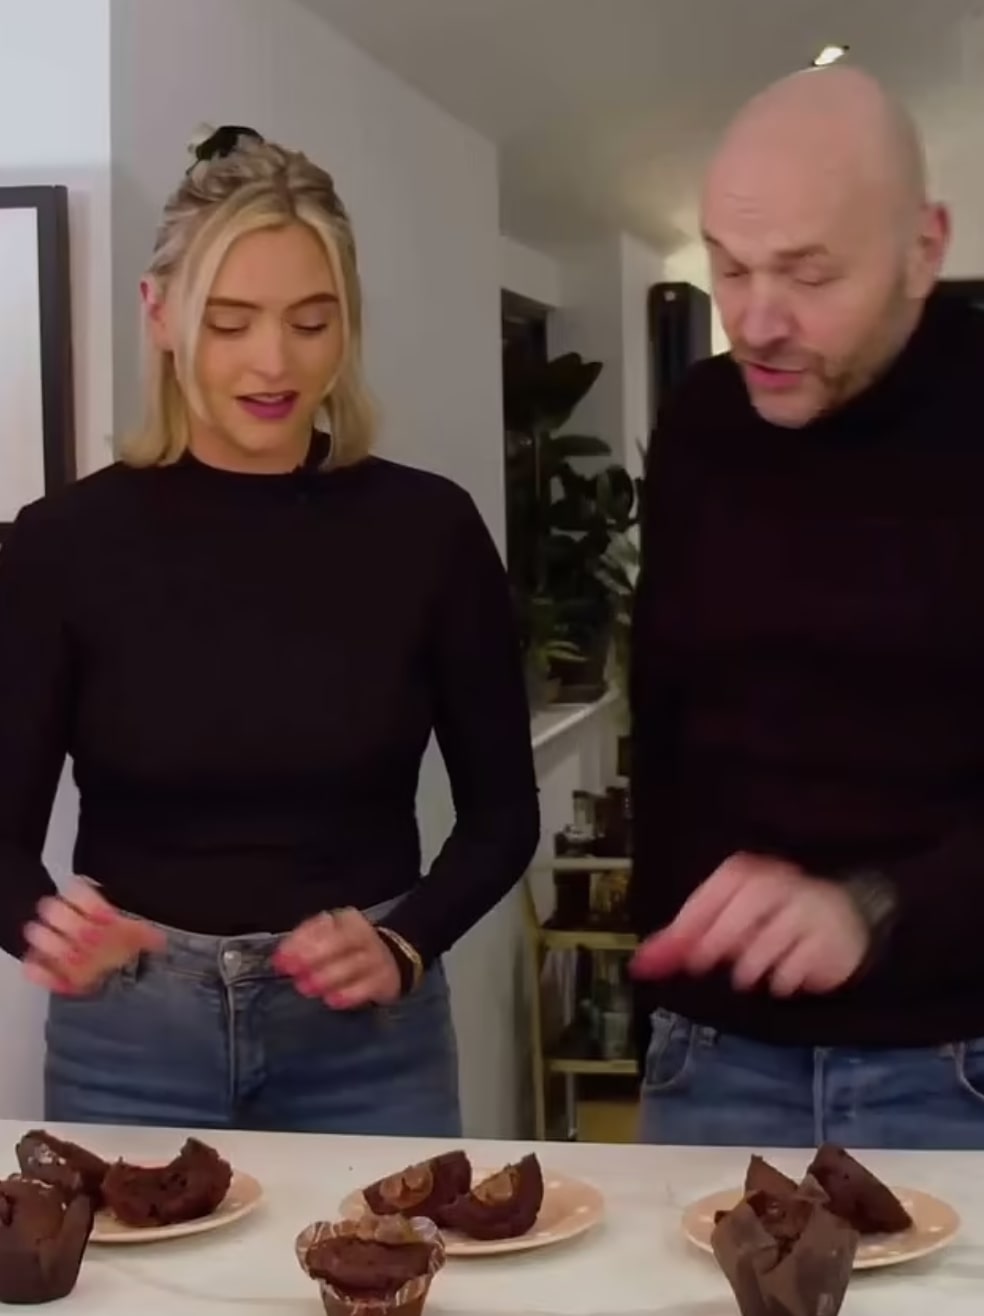 Sunday Brunch’s Simon Rimmer reveals daughter rejected Love Island as he slams show for ‘objectifying women’